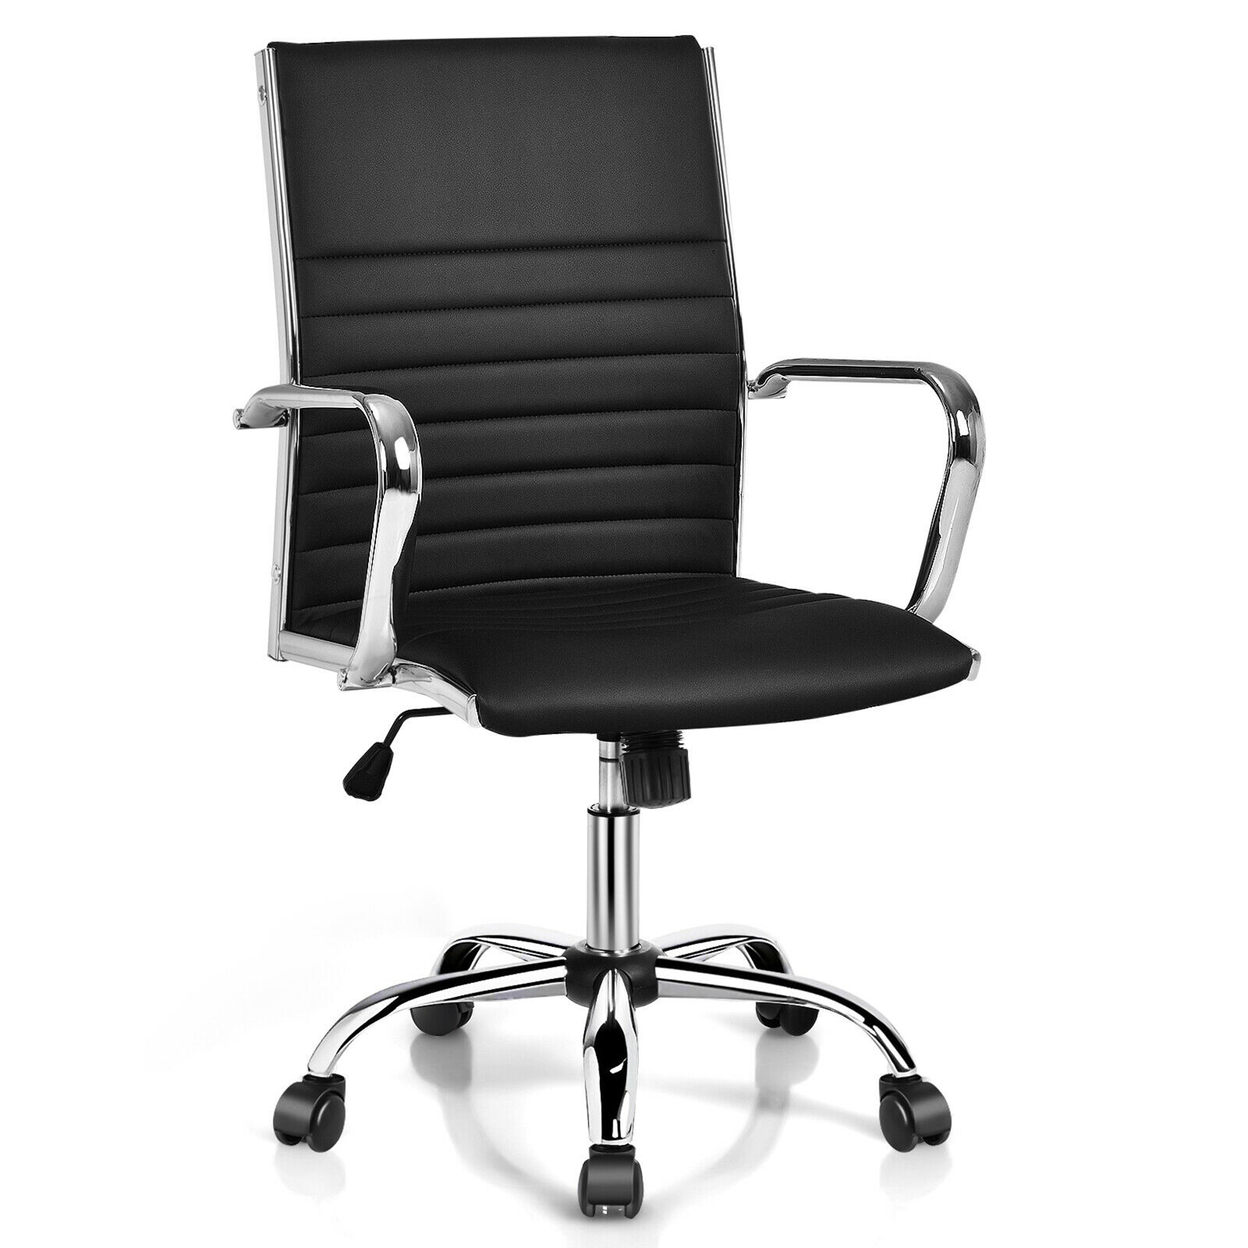 PU Leather Office Chair High Back Conference Task Chair W/Armrests - Black, 1 PC